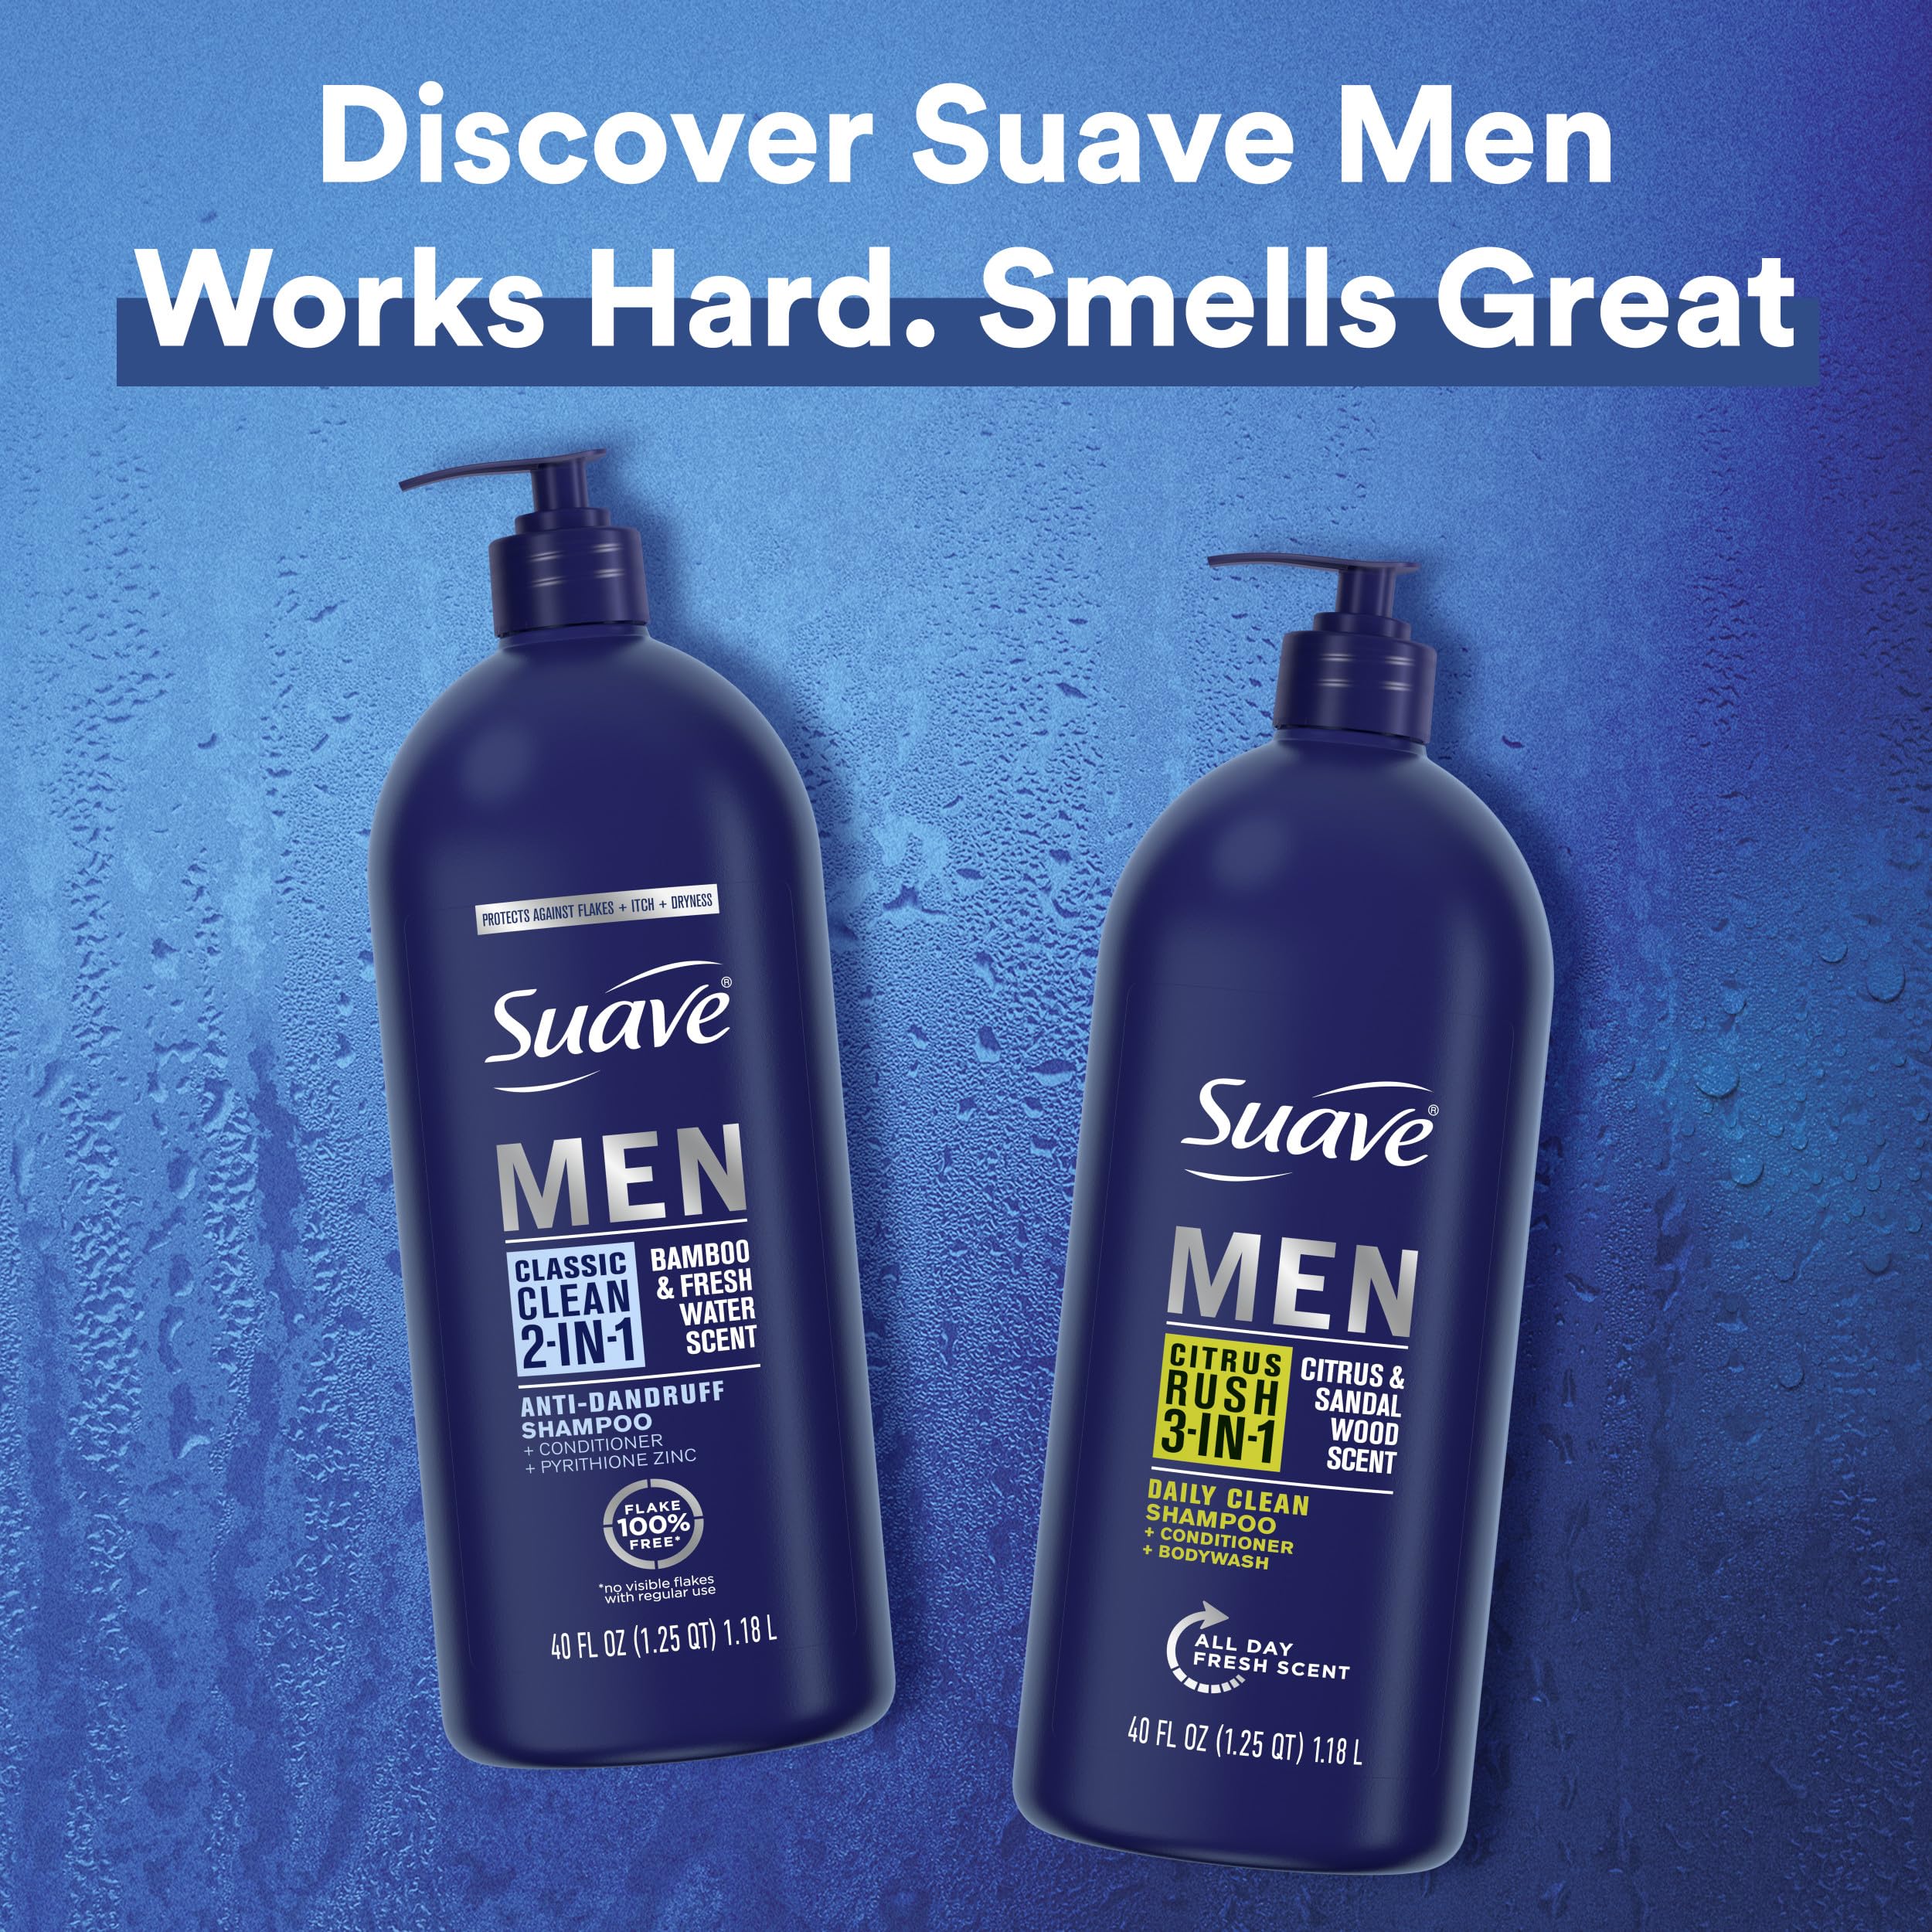 Suave Men 2 in 1 Anti Dandruff Shampoo and Conditioner, Classic Clean with Bamboo scent, 40 oz Pack of 3